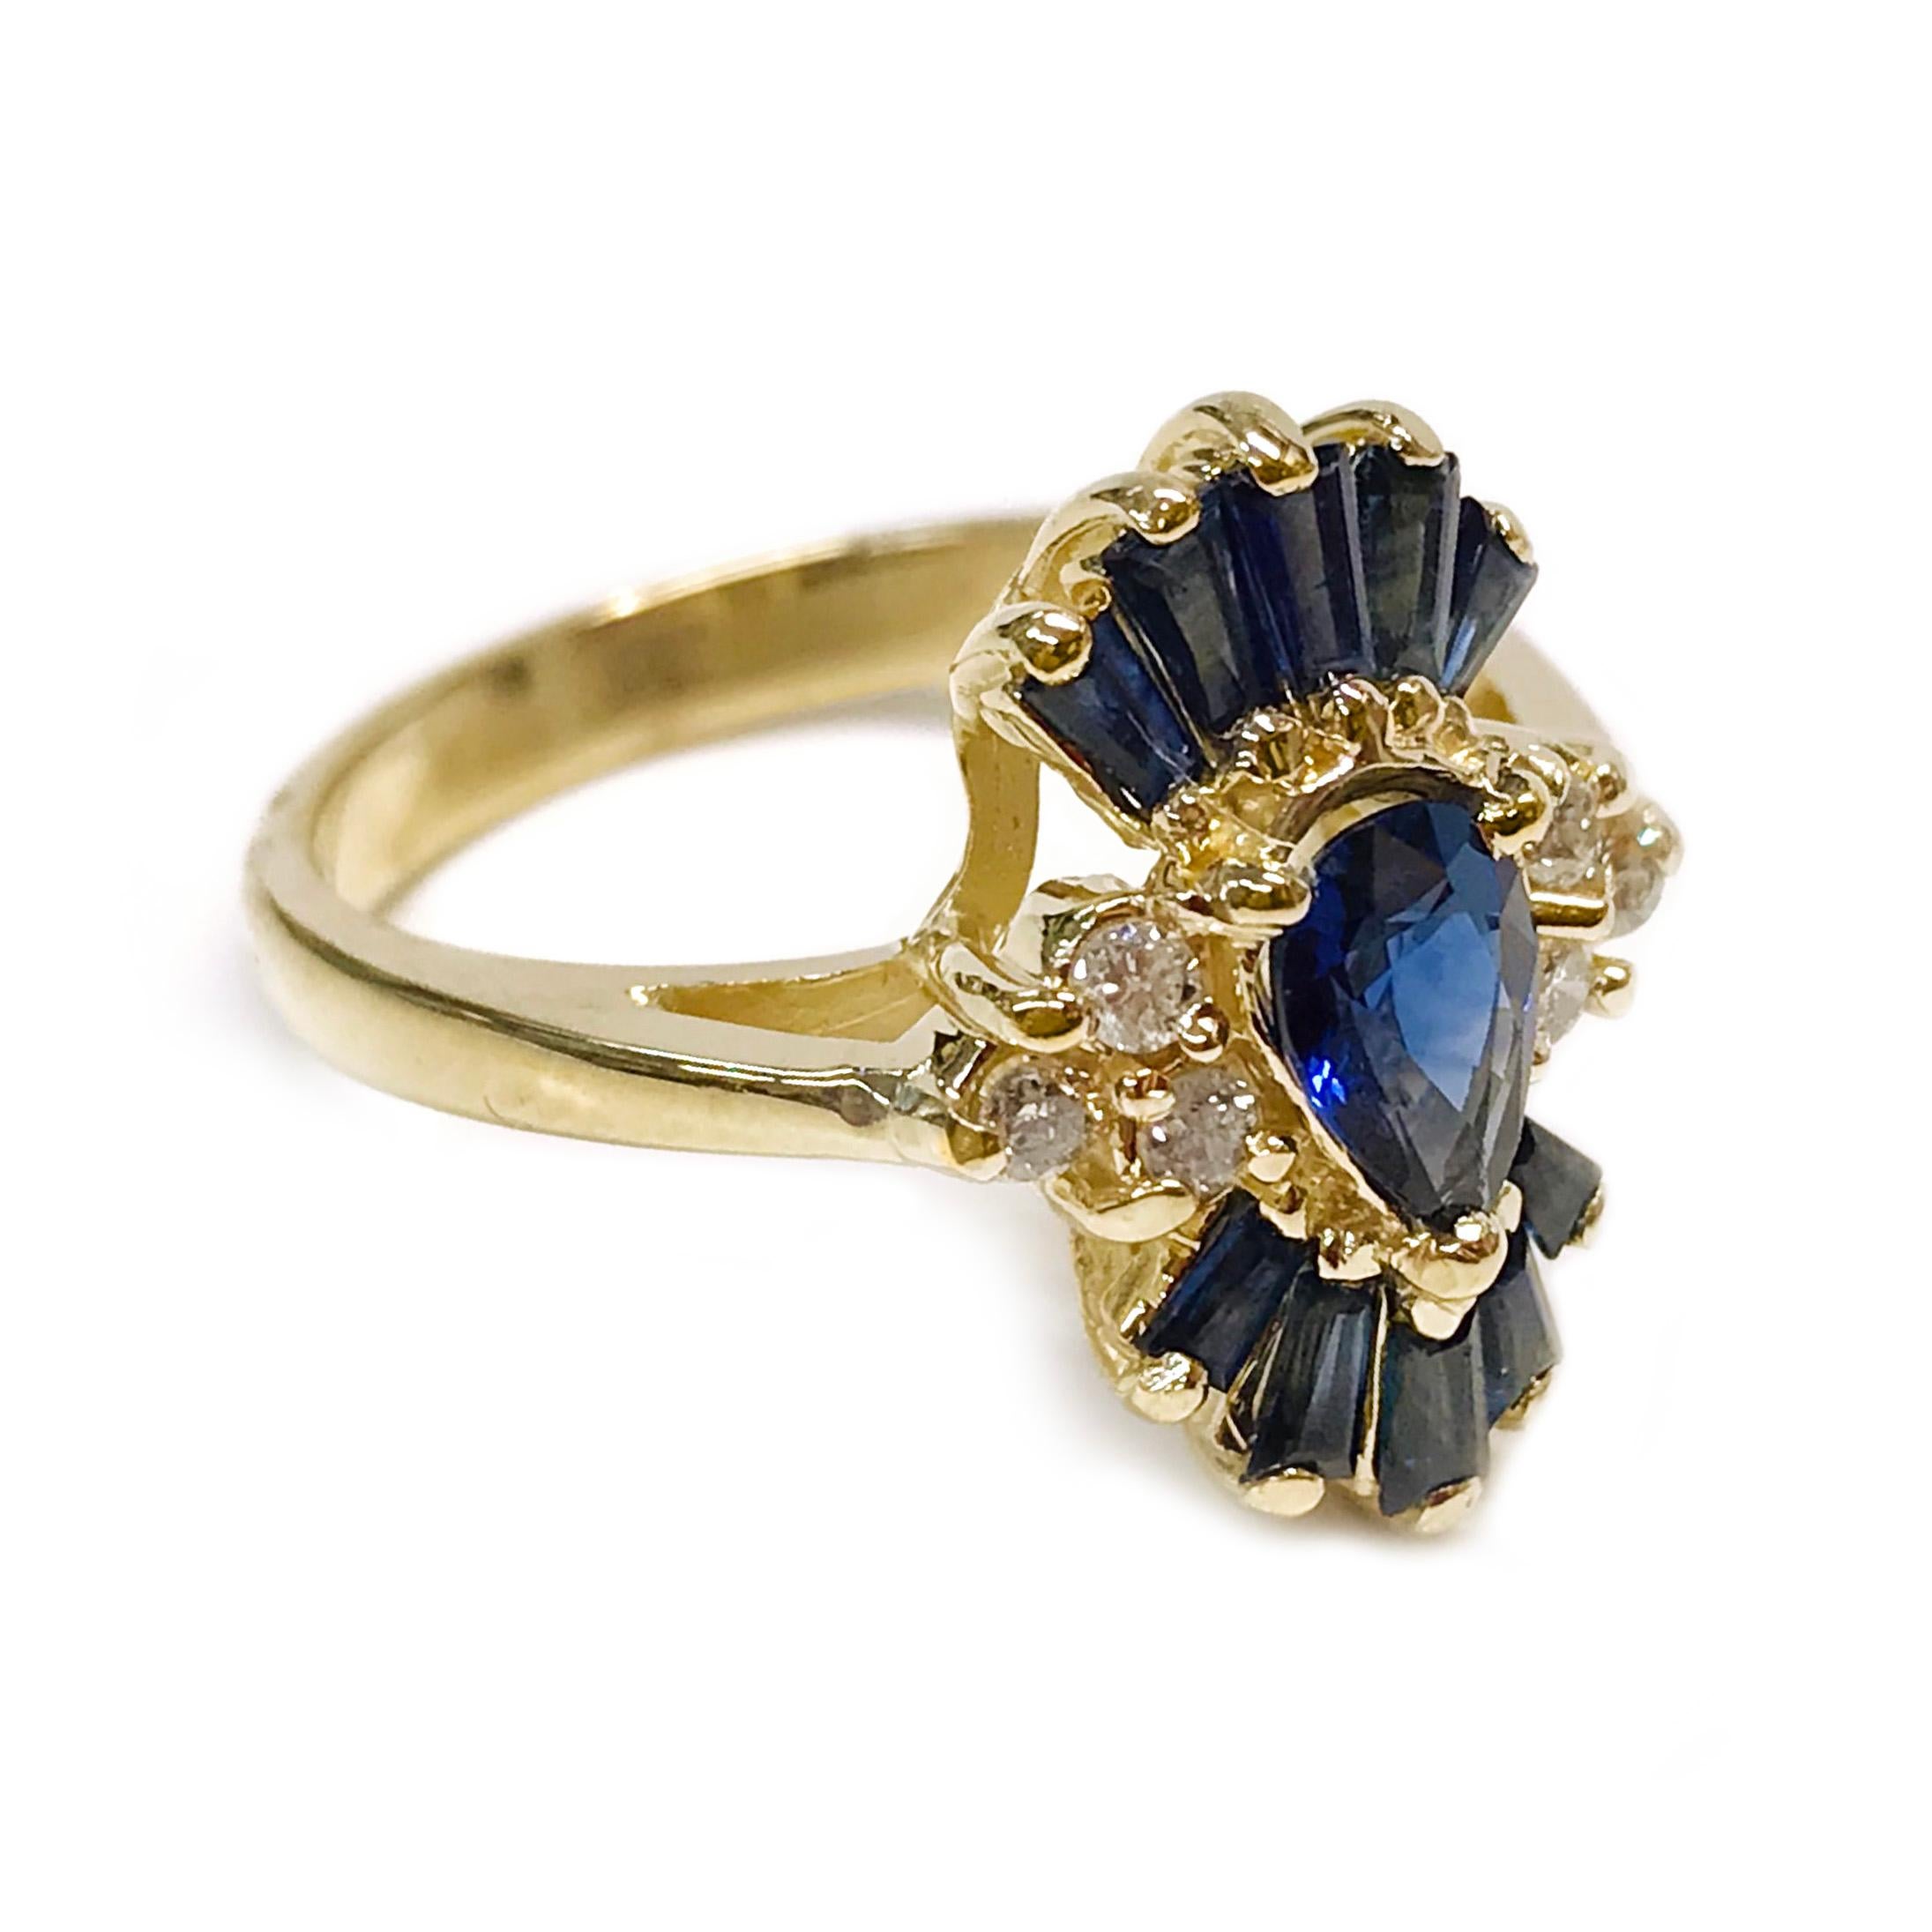 14 Karat Blue Sapphire Diamond Ring. The ring features a center pear-shaped blue sapphire with three round diamonds on either side and five baguette blue sapphires on the top and bottom. The total carat weight of the center sapphire is 0.54ct. The